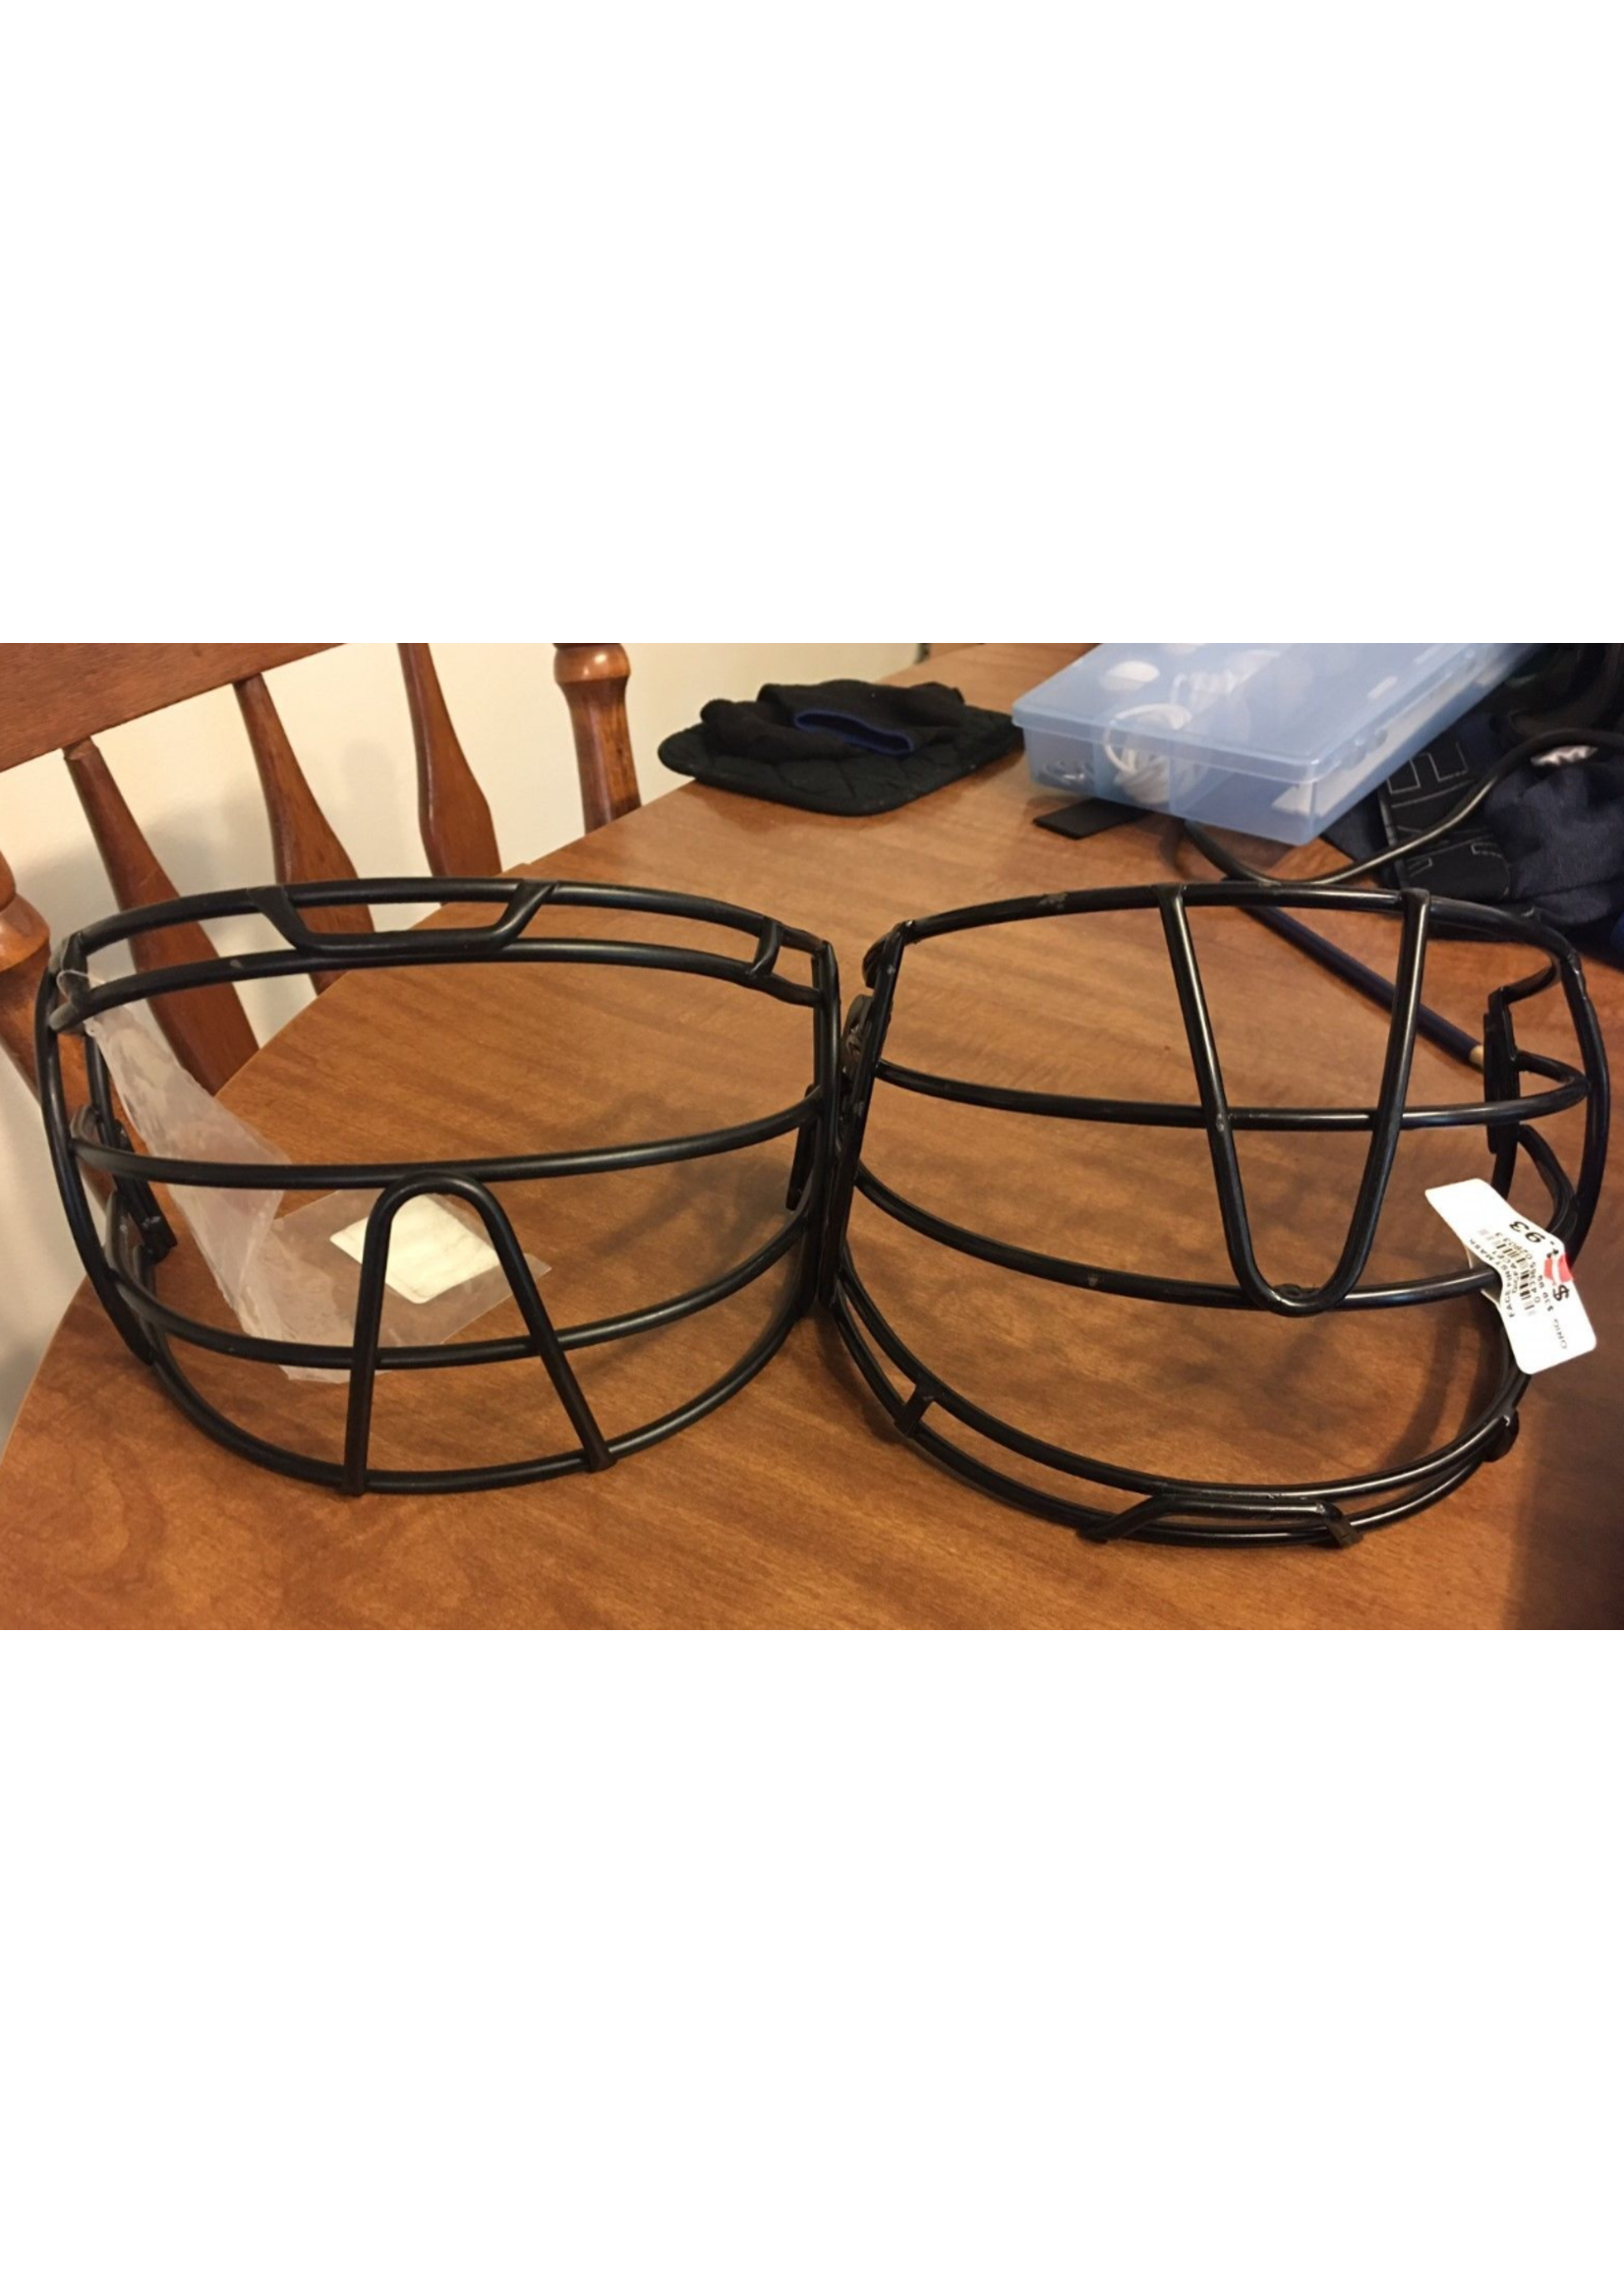 NA SOFTBALL/BASEBALL Face First Mask - New, Some Dings